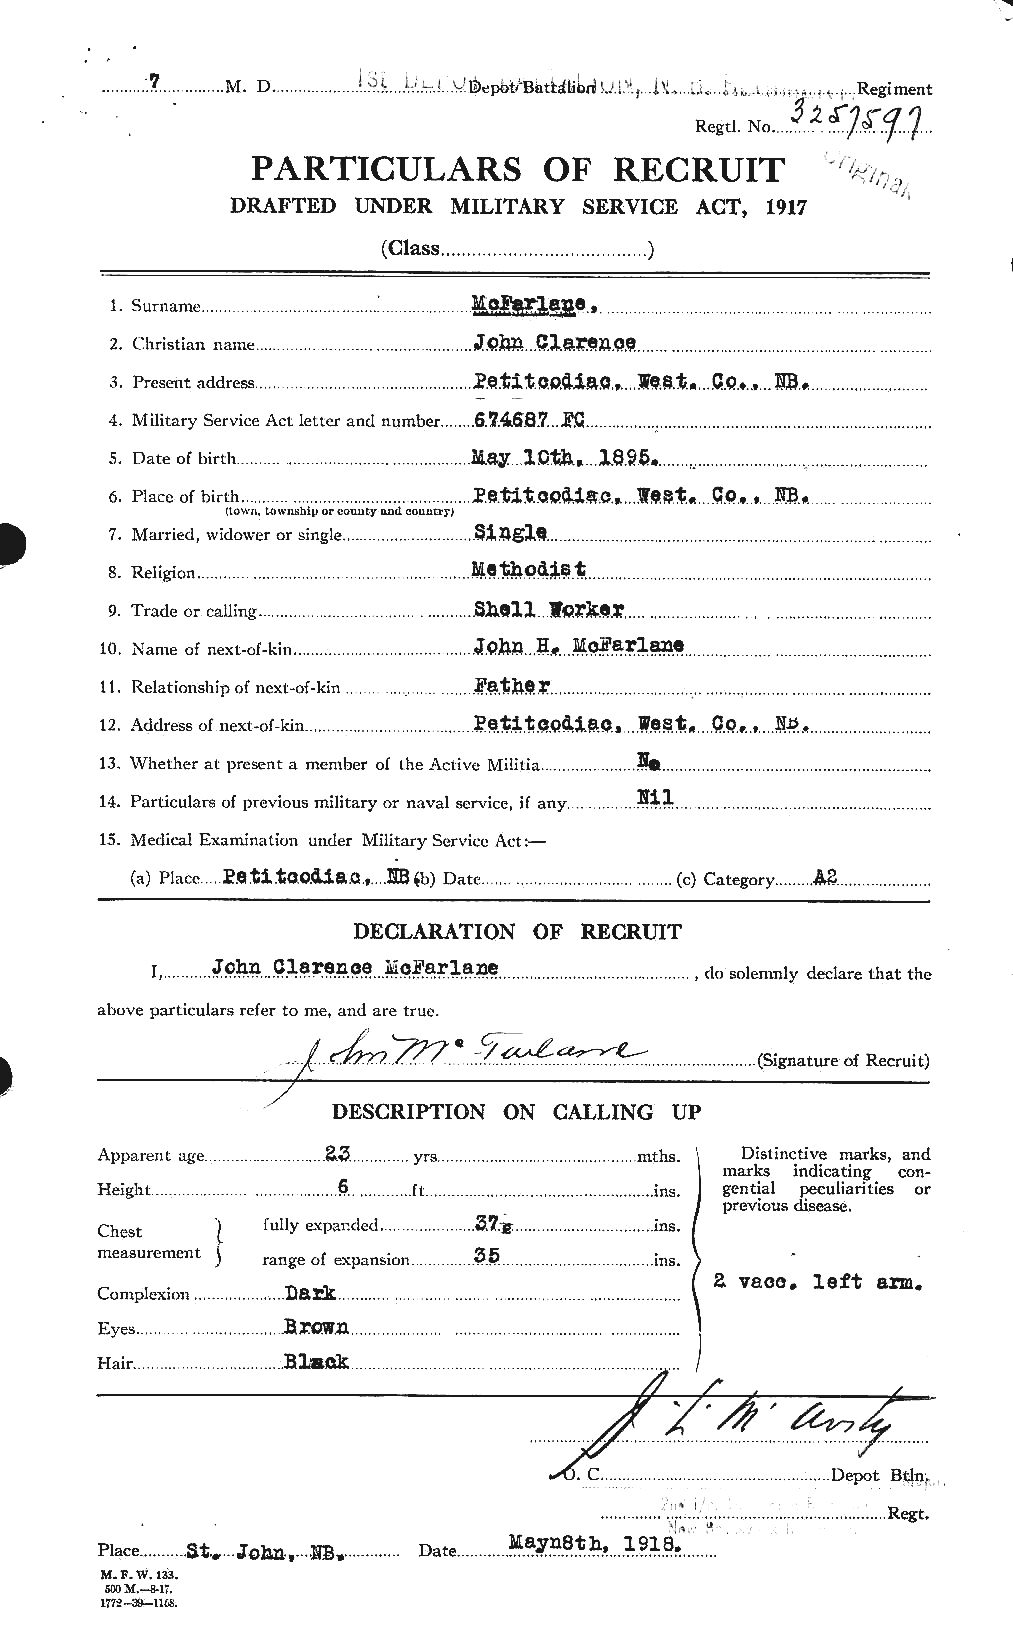 Personnel Records of the First World War - CEF 522685a